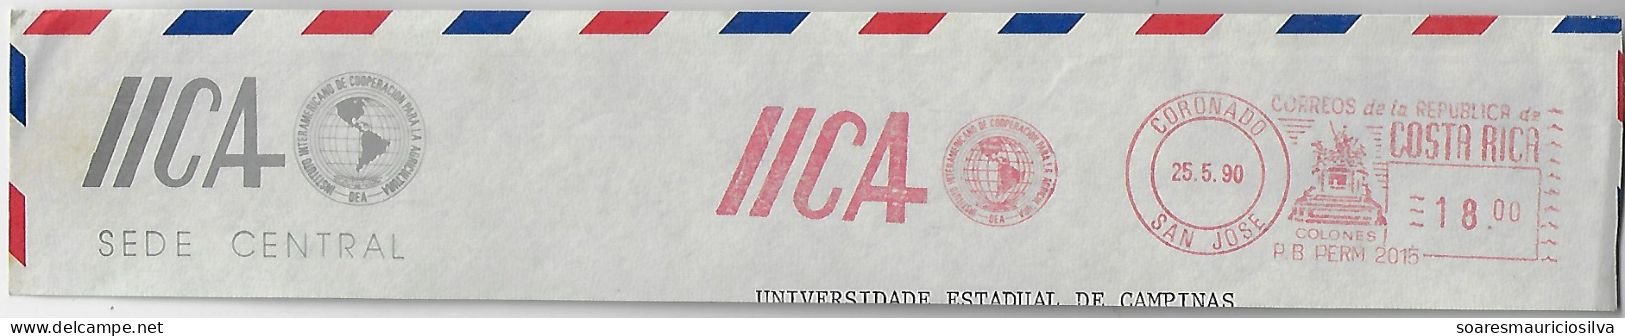 Costa Rica 1990 Fragment Meter Stamp Pitney Bowes-GB5000 Slogan Inter-American Institute For Cooperation On Agriculture - Costa Rica